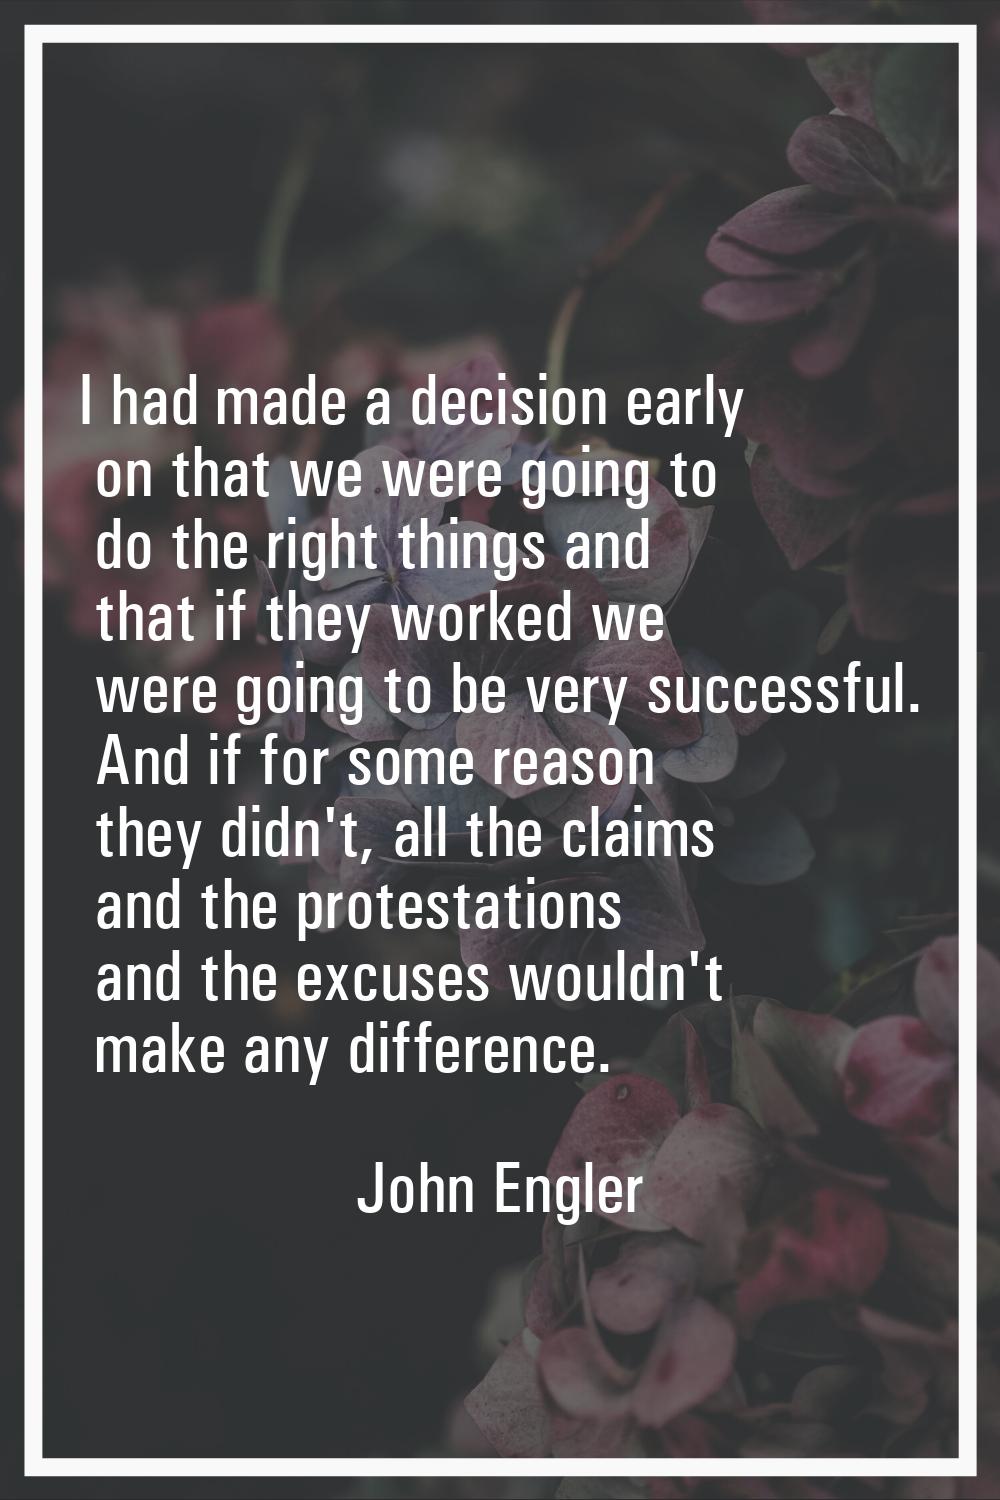 I had made a decision early on that we were going to do the right things and that if they worked we